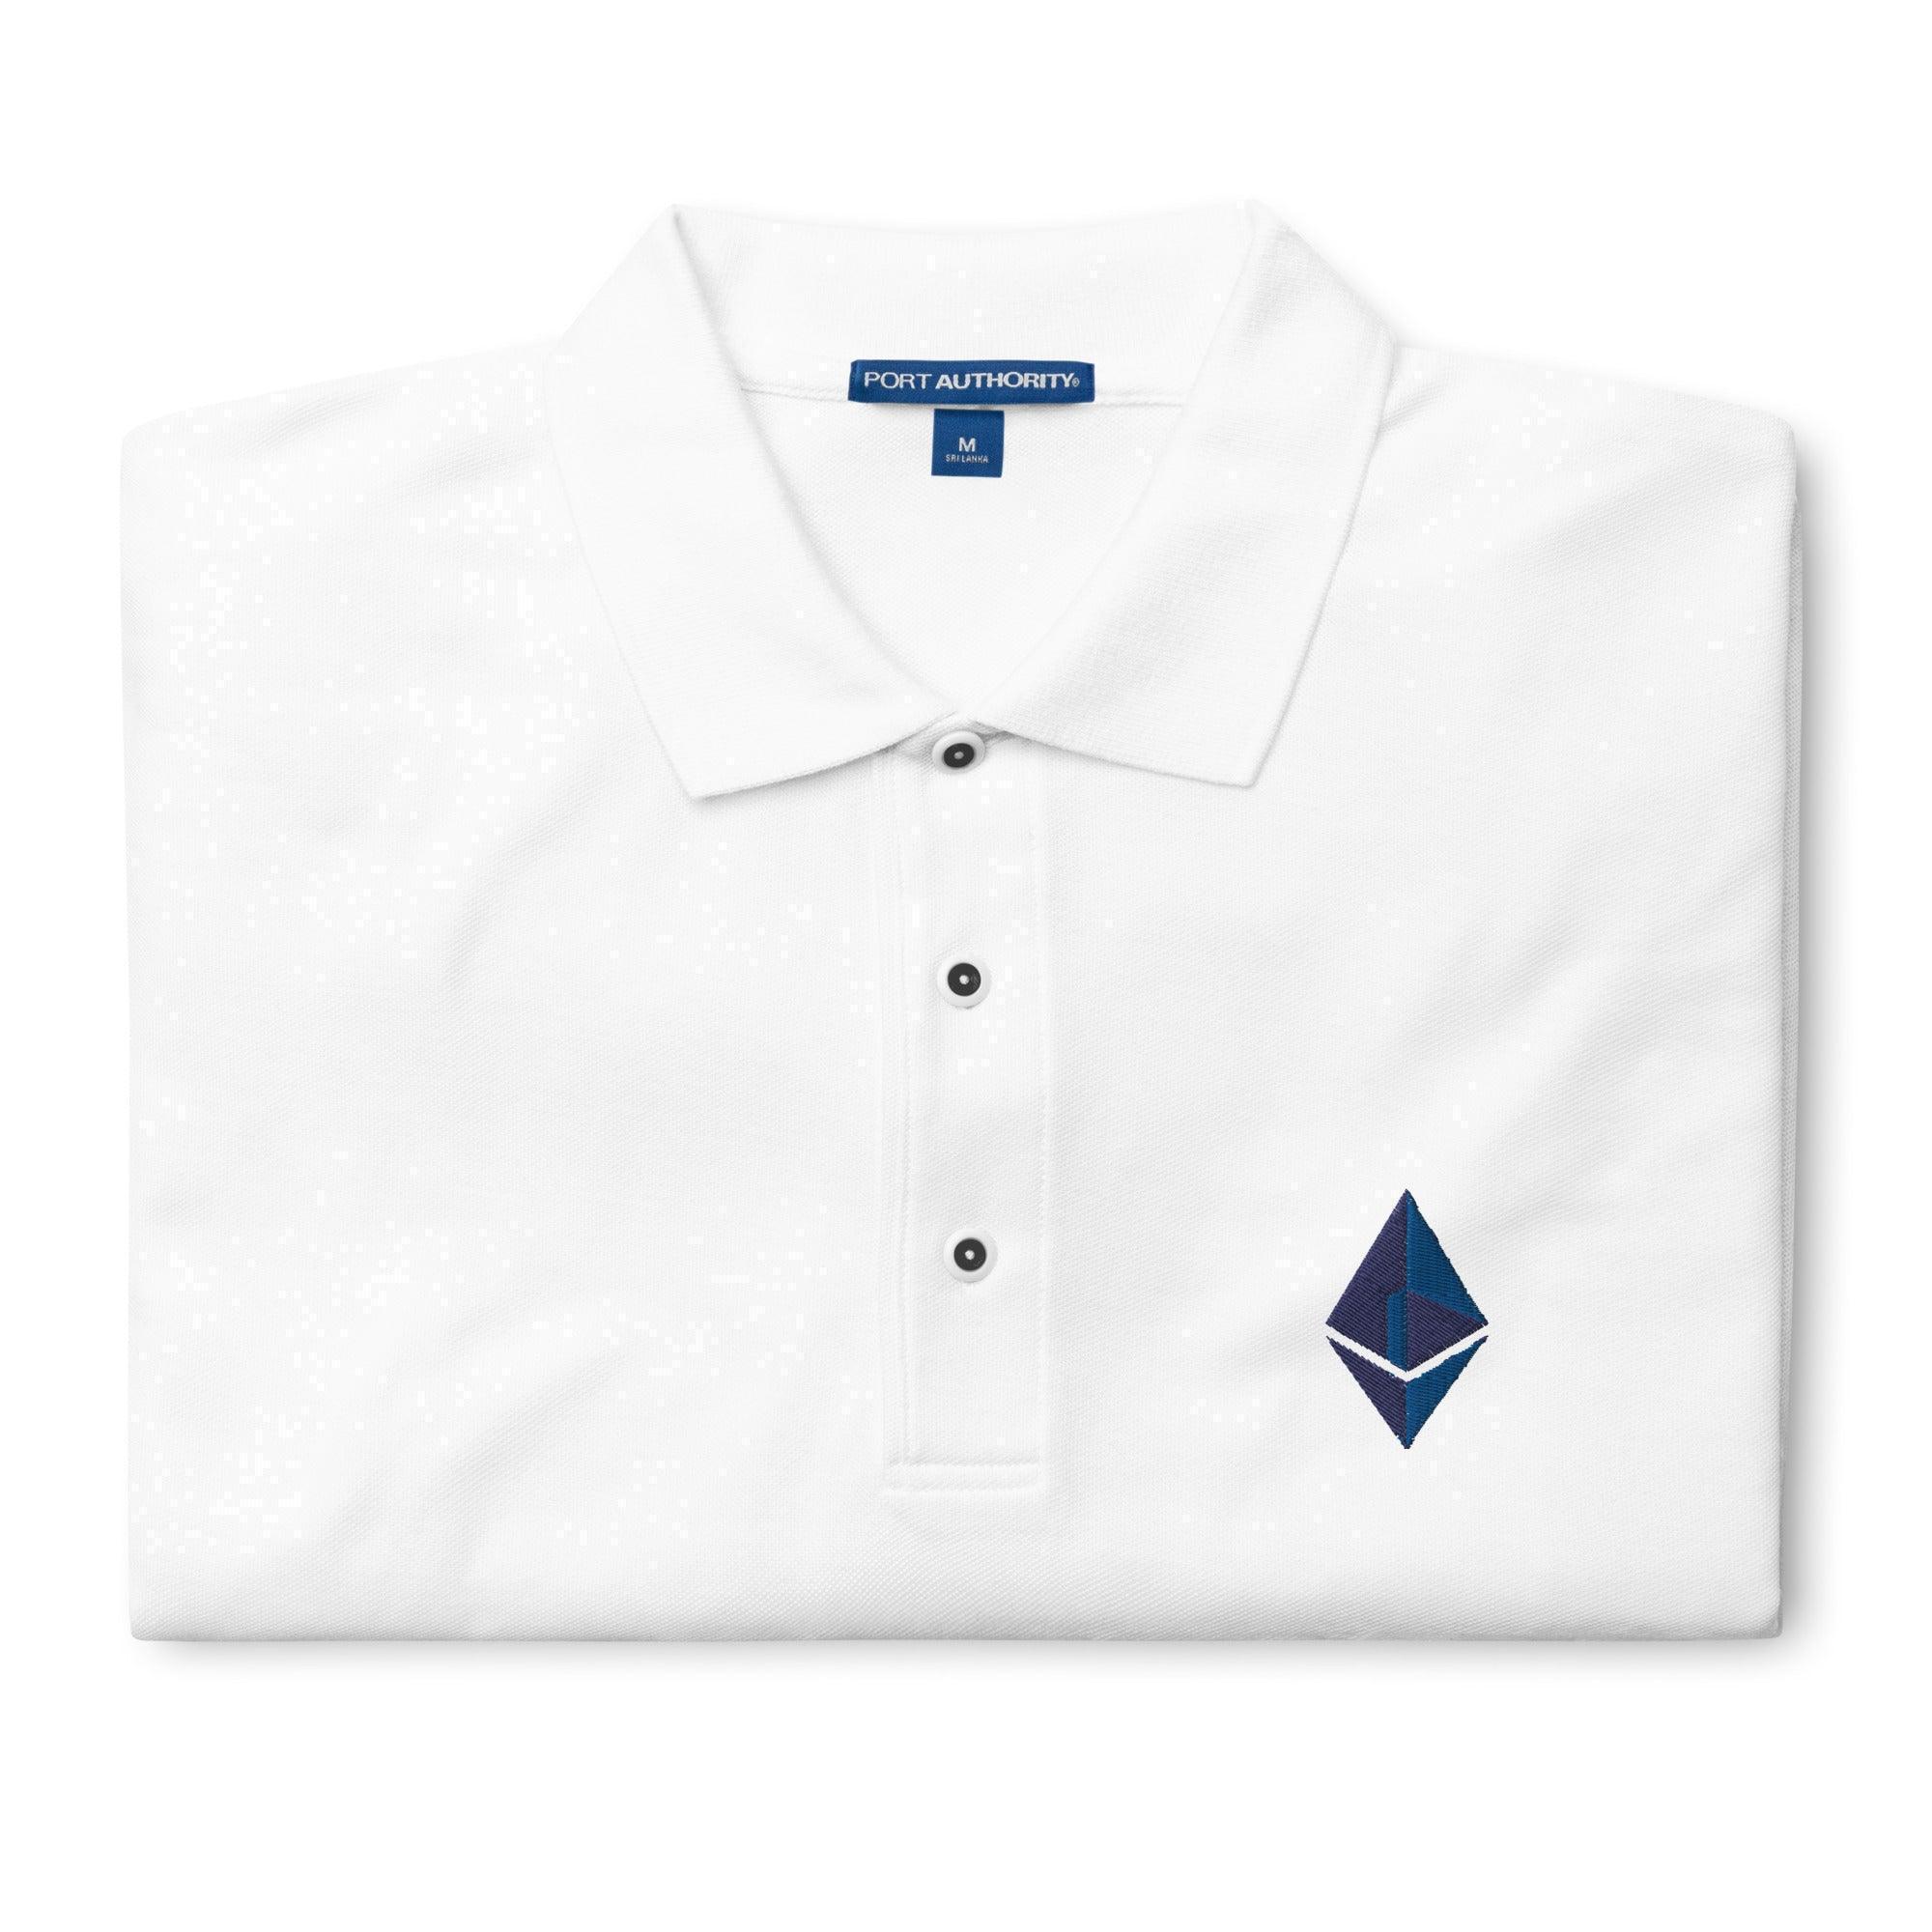 Ethereum Polo Shirt - InvestmenTees